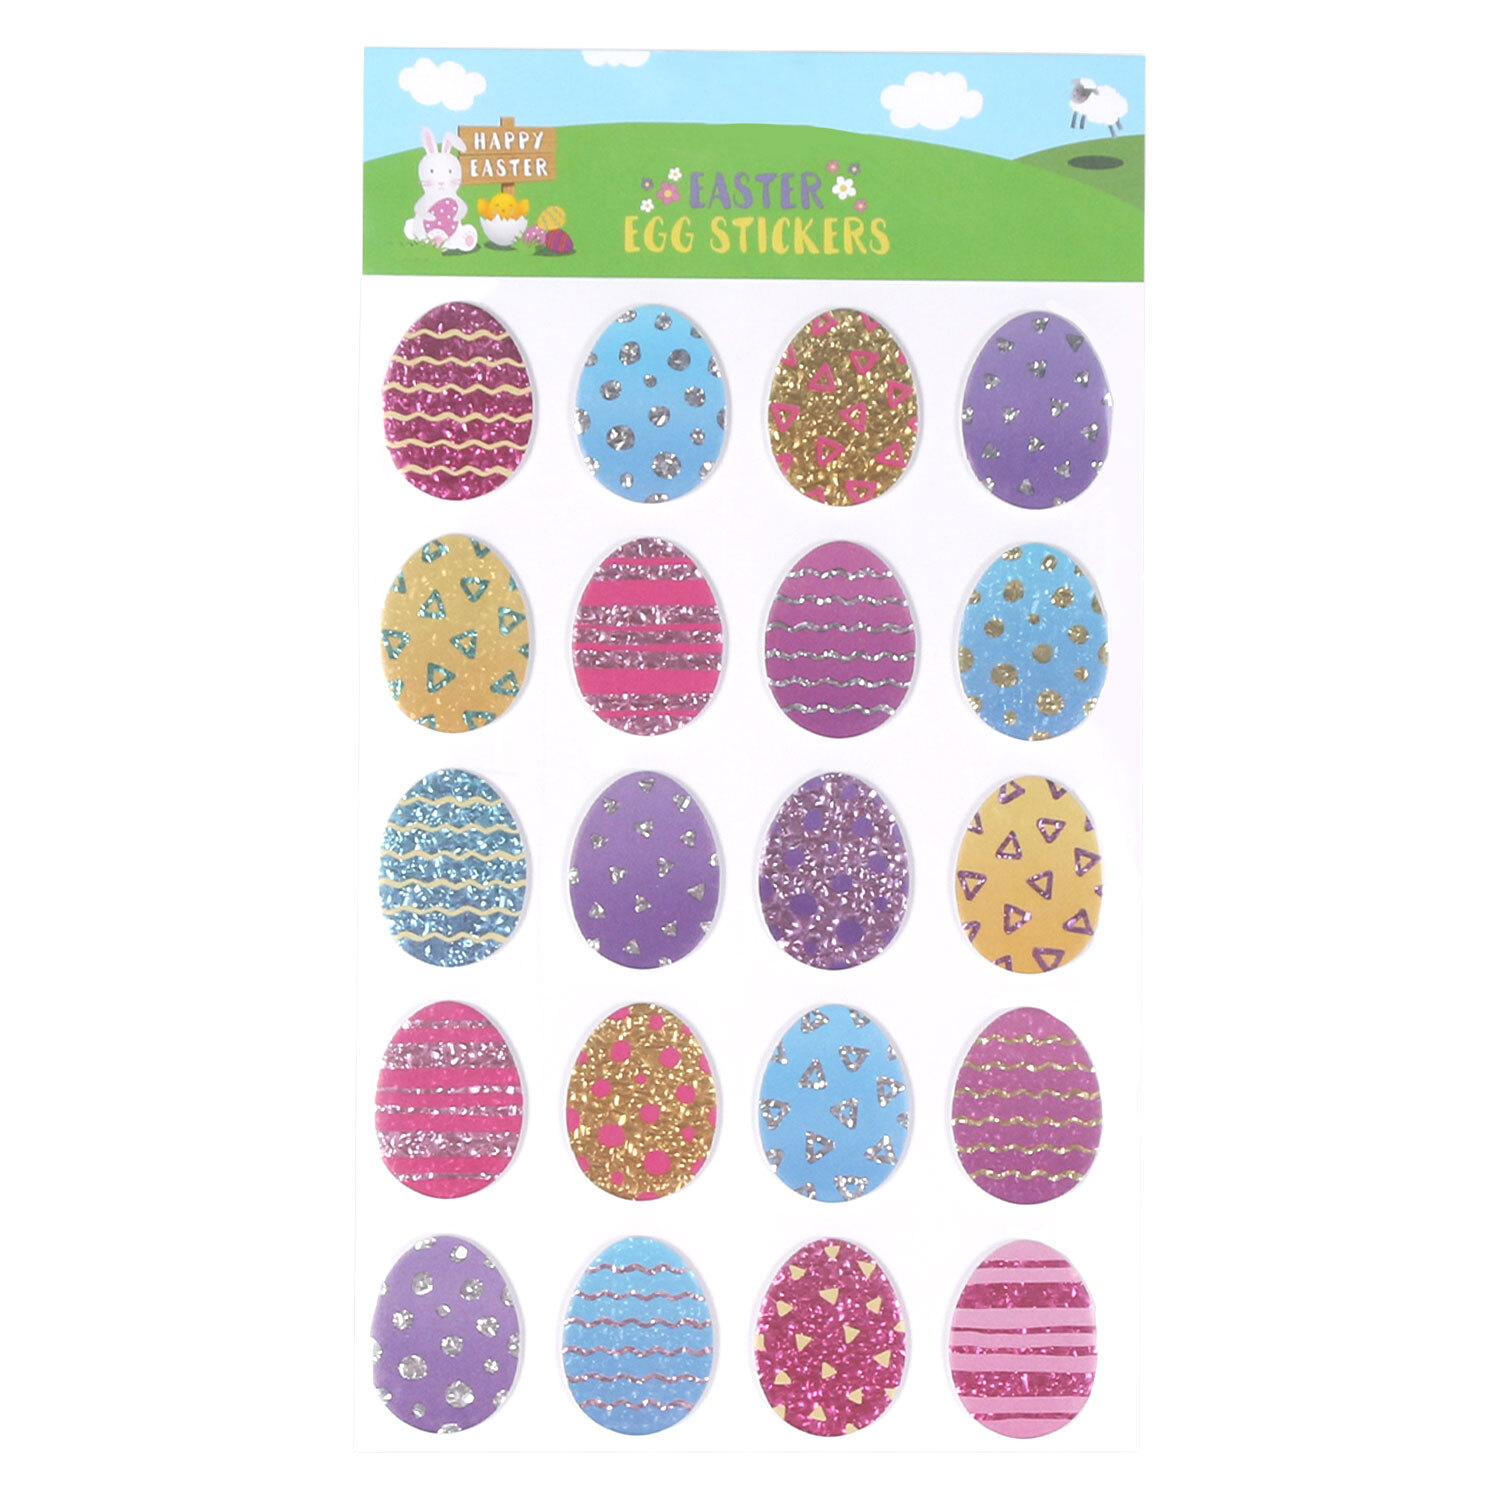 Easter Egg Stickers Image 2